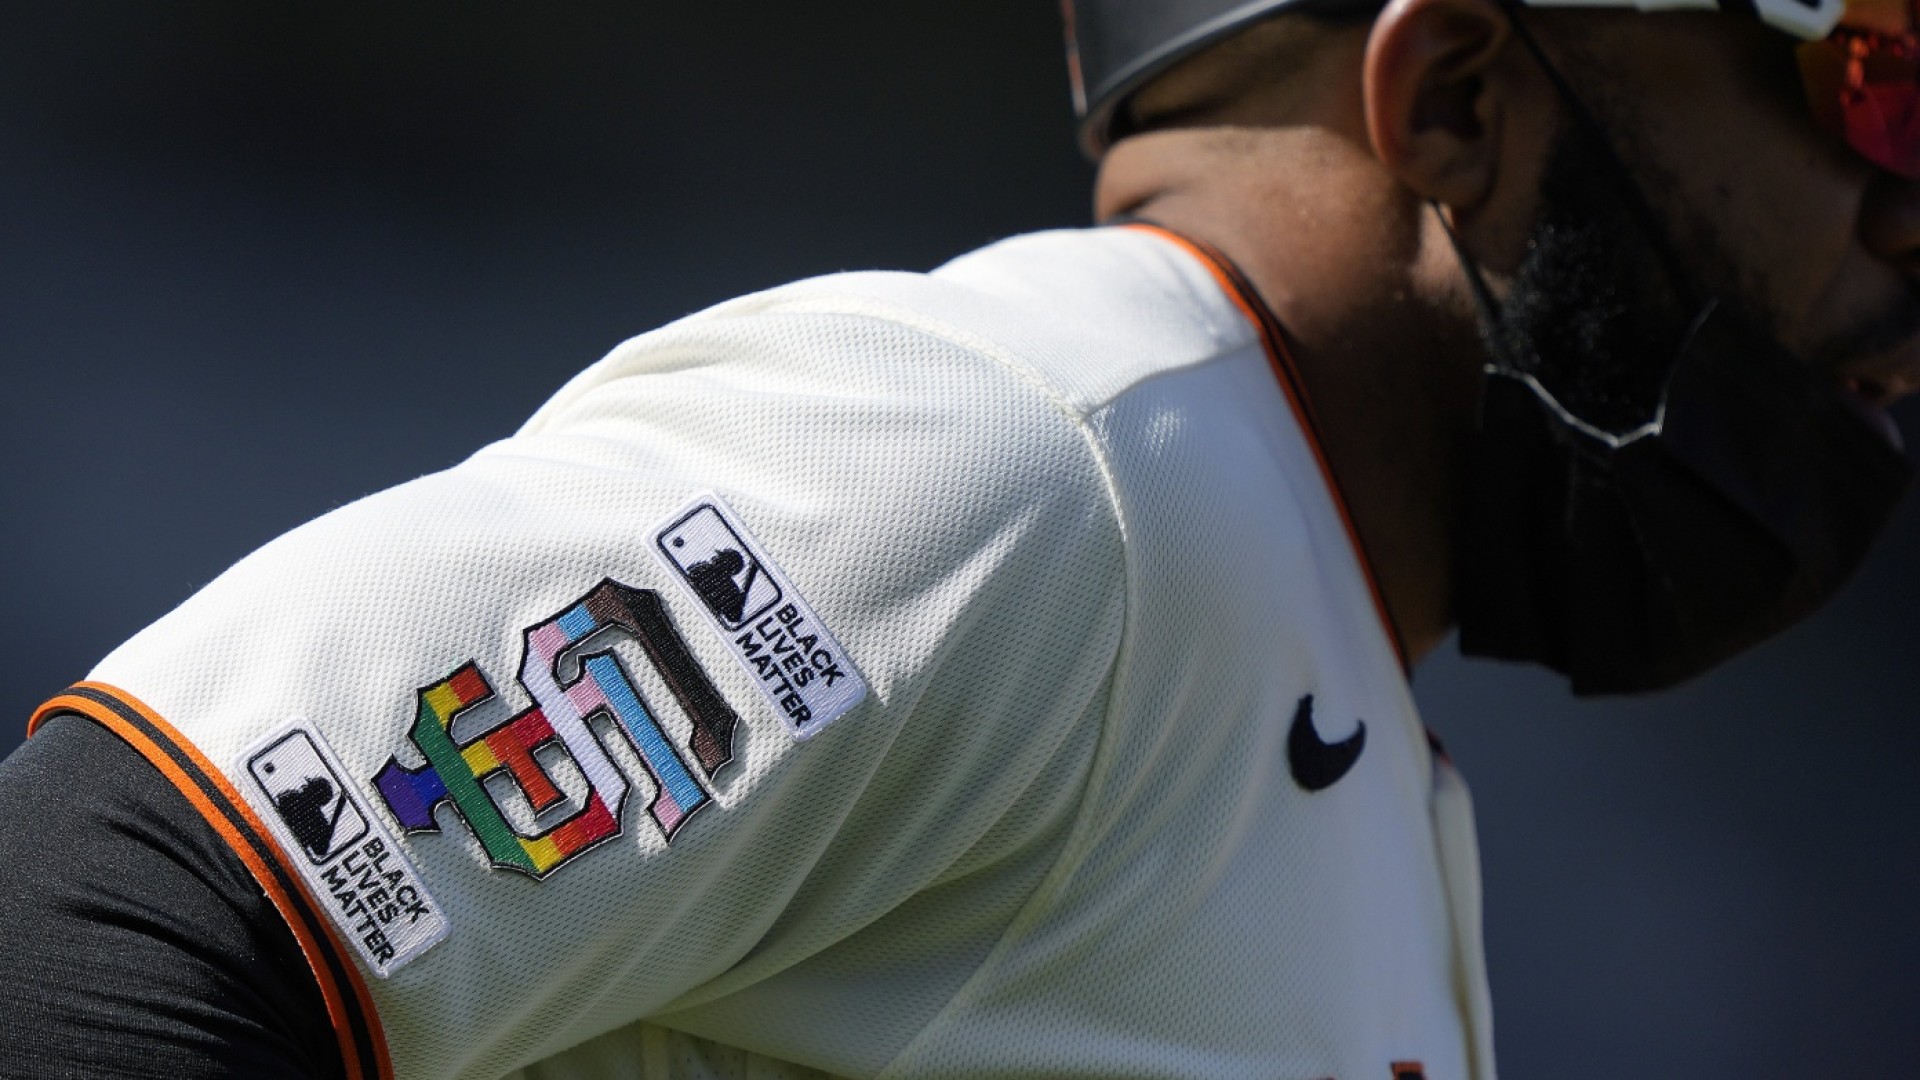 San Francisco Giants celebrate Pride Month with Pride colors on